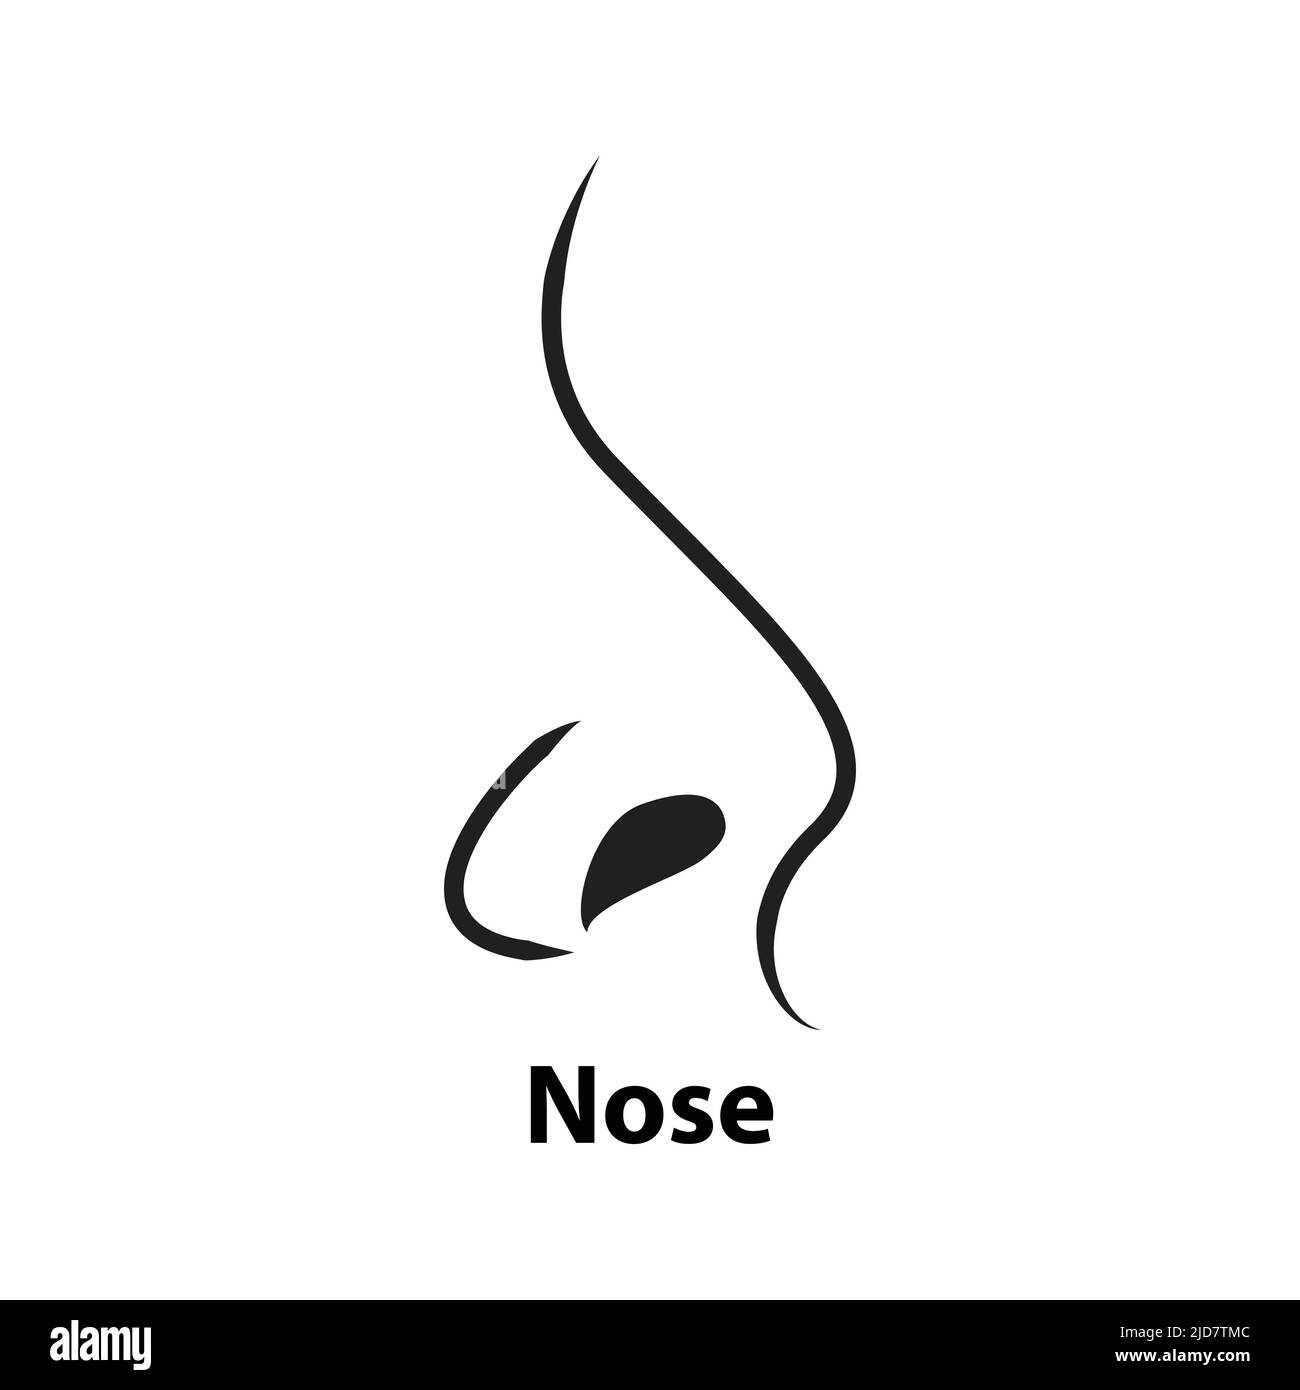 Nose outline Black and White Stock Photos & Images - Alamy